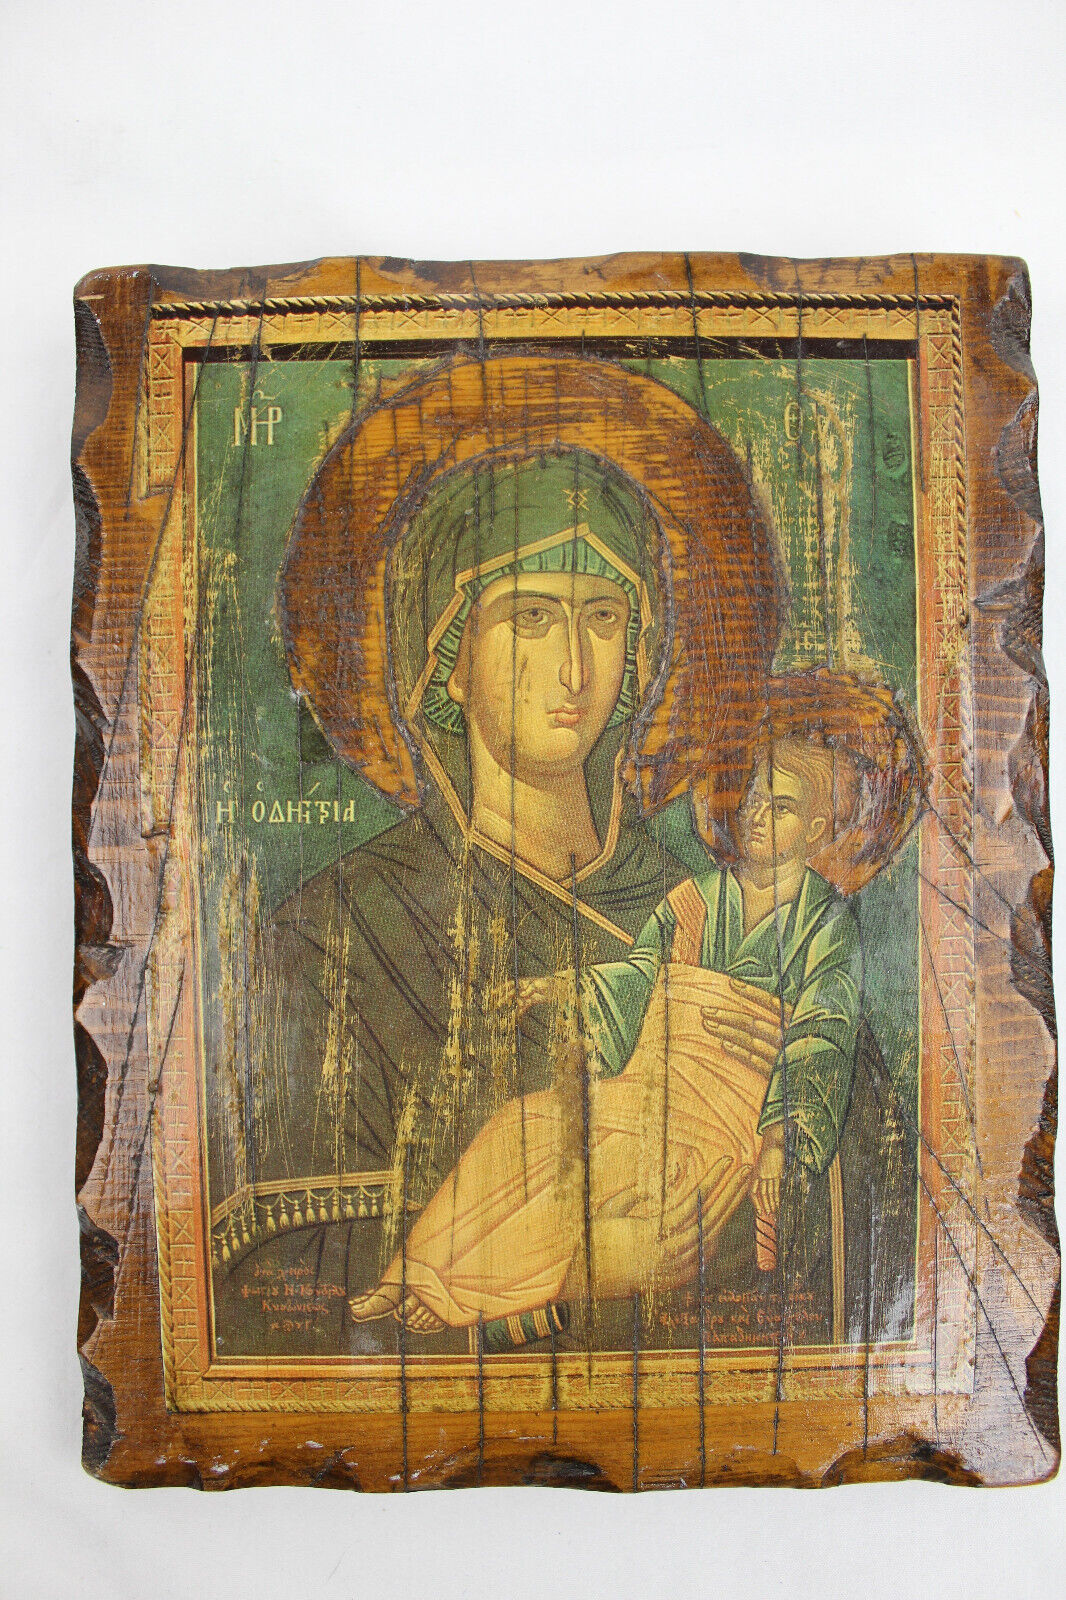 Russian Orthodox Virgin Mary Wood Icon - 9 x 7 in, Vintage, ca 1970